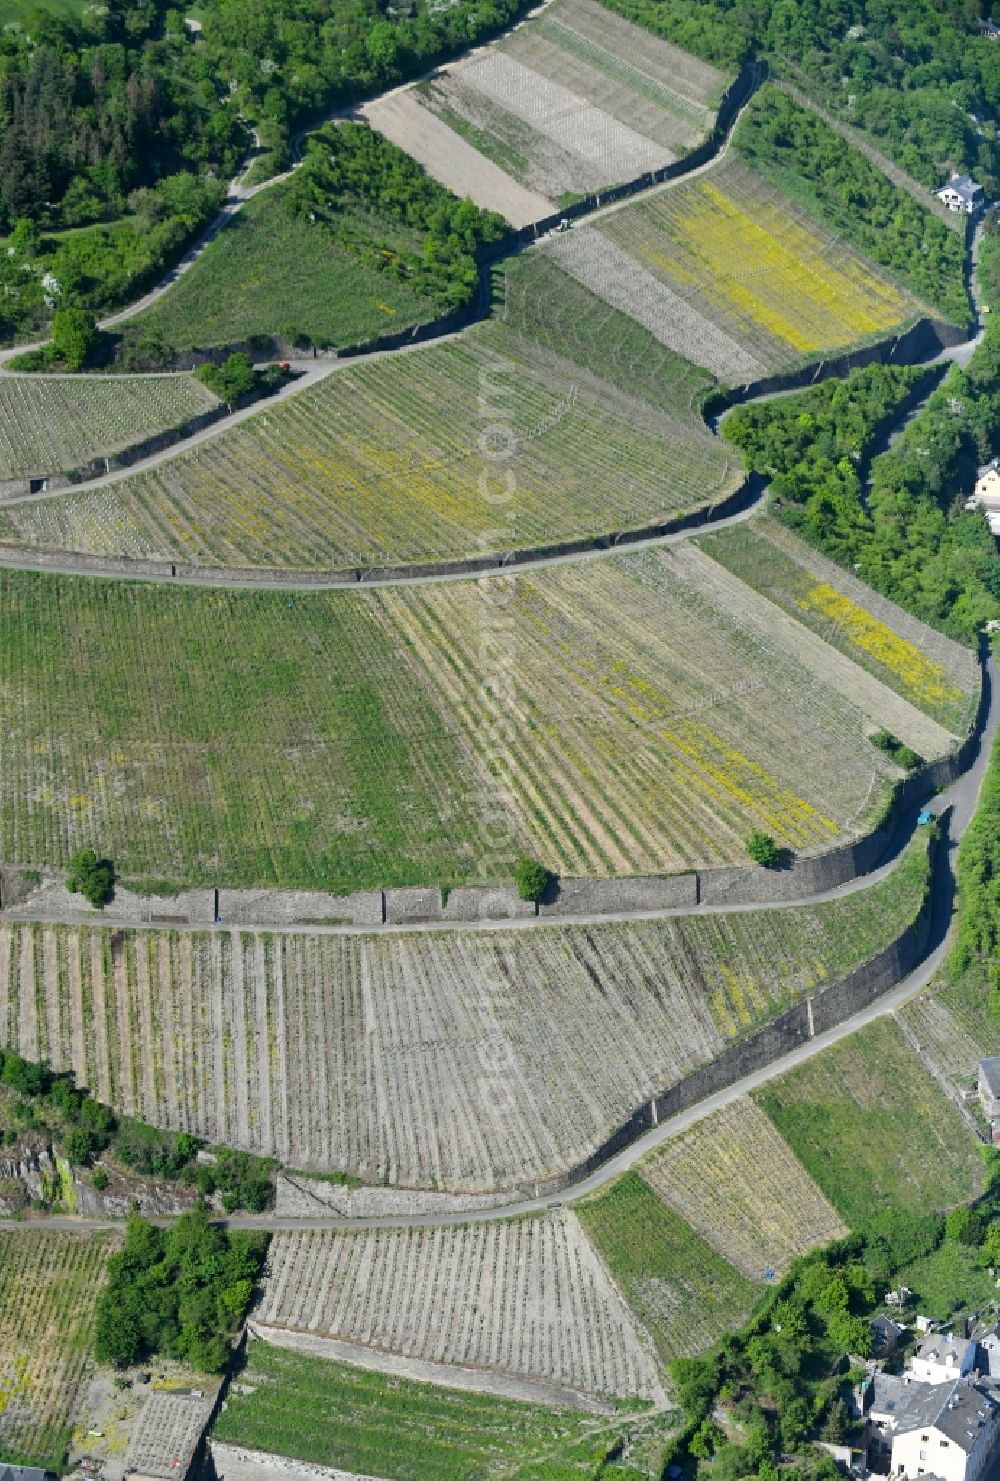 Kaub from the bird's eye view: Fields of wine cultivation landscape in Kaub in the state Rhineland-Palatinate, Germany